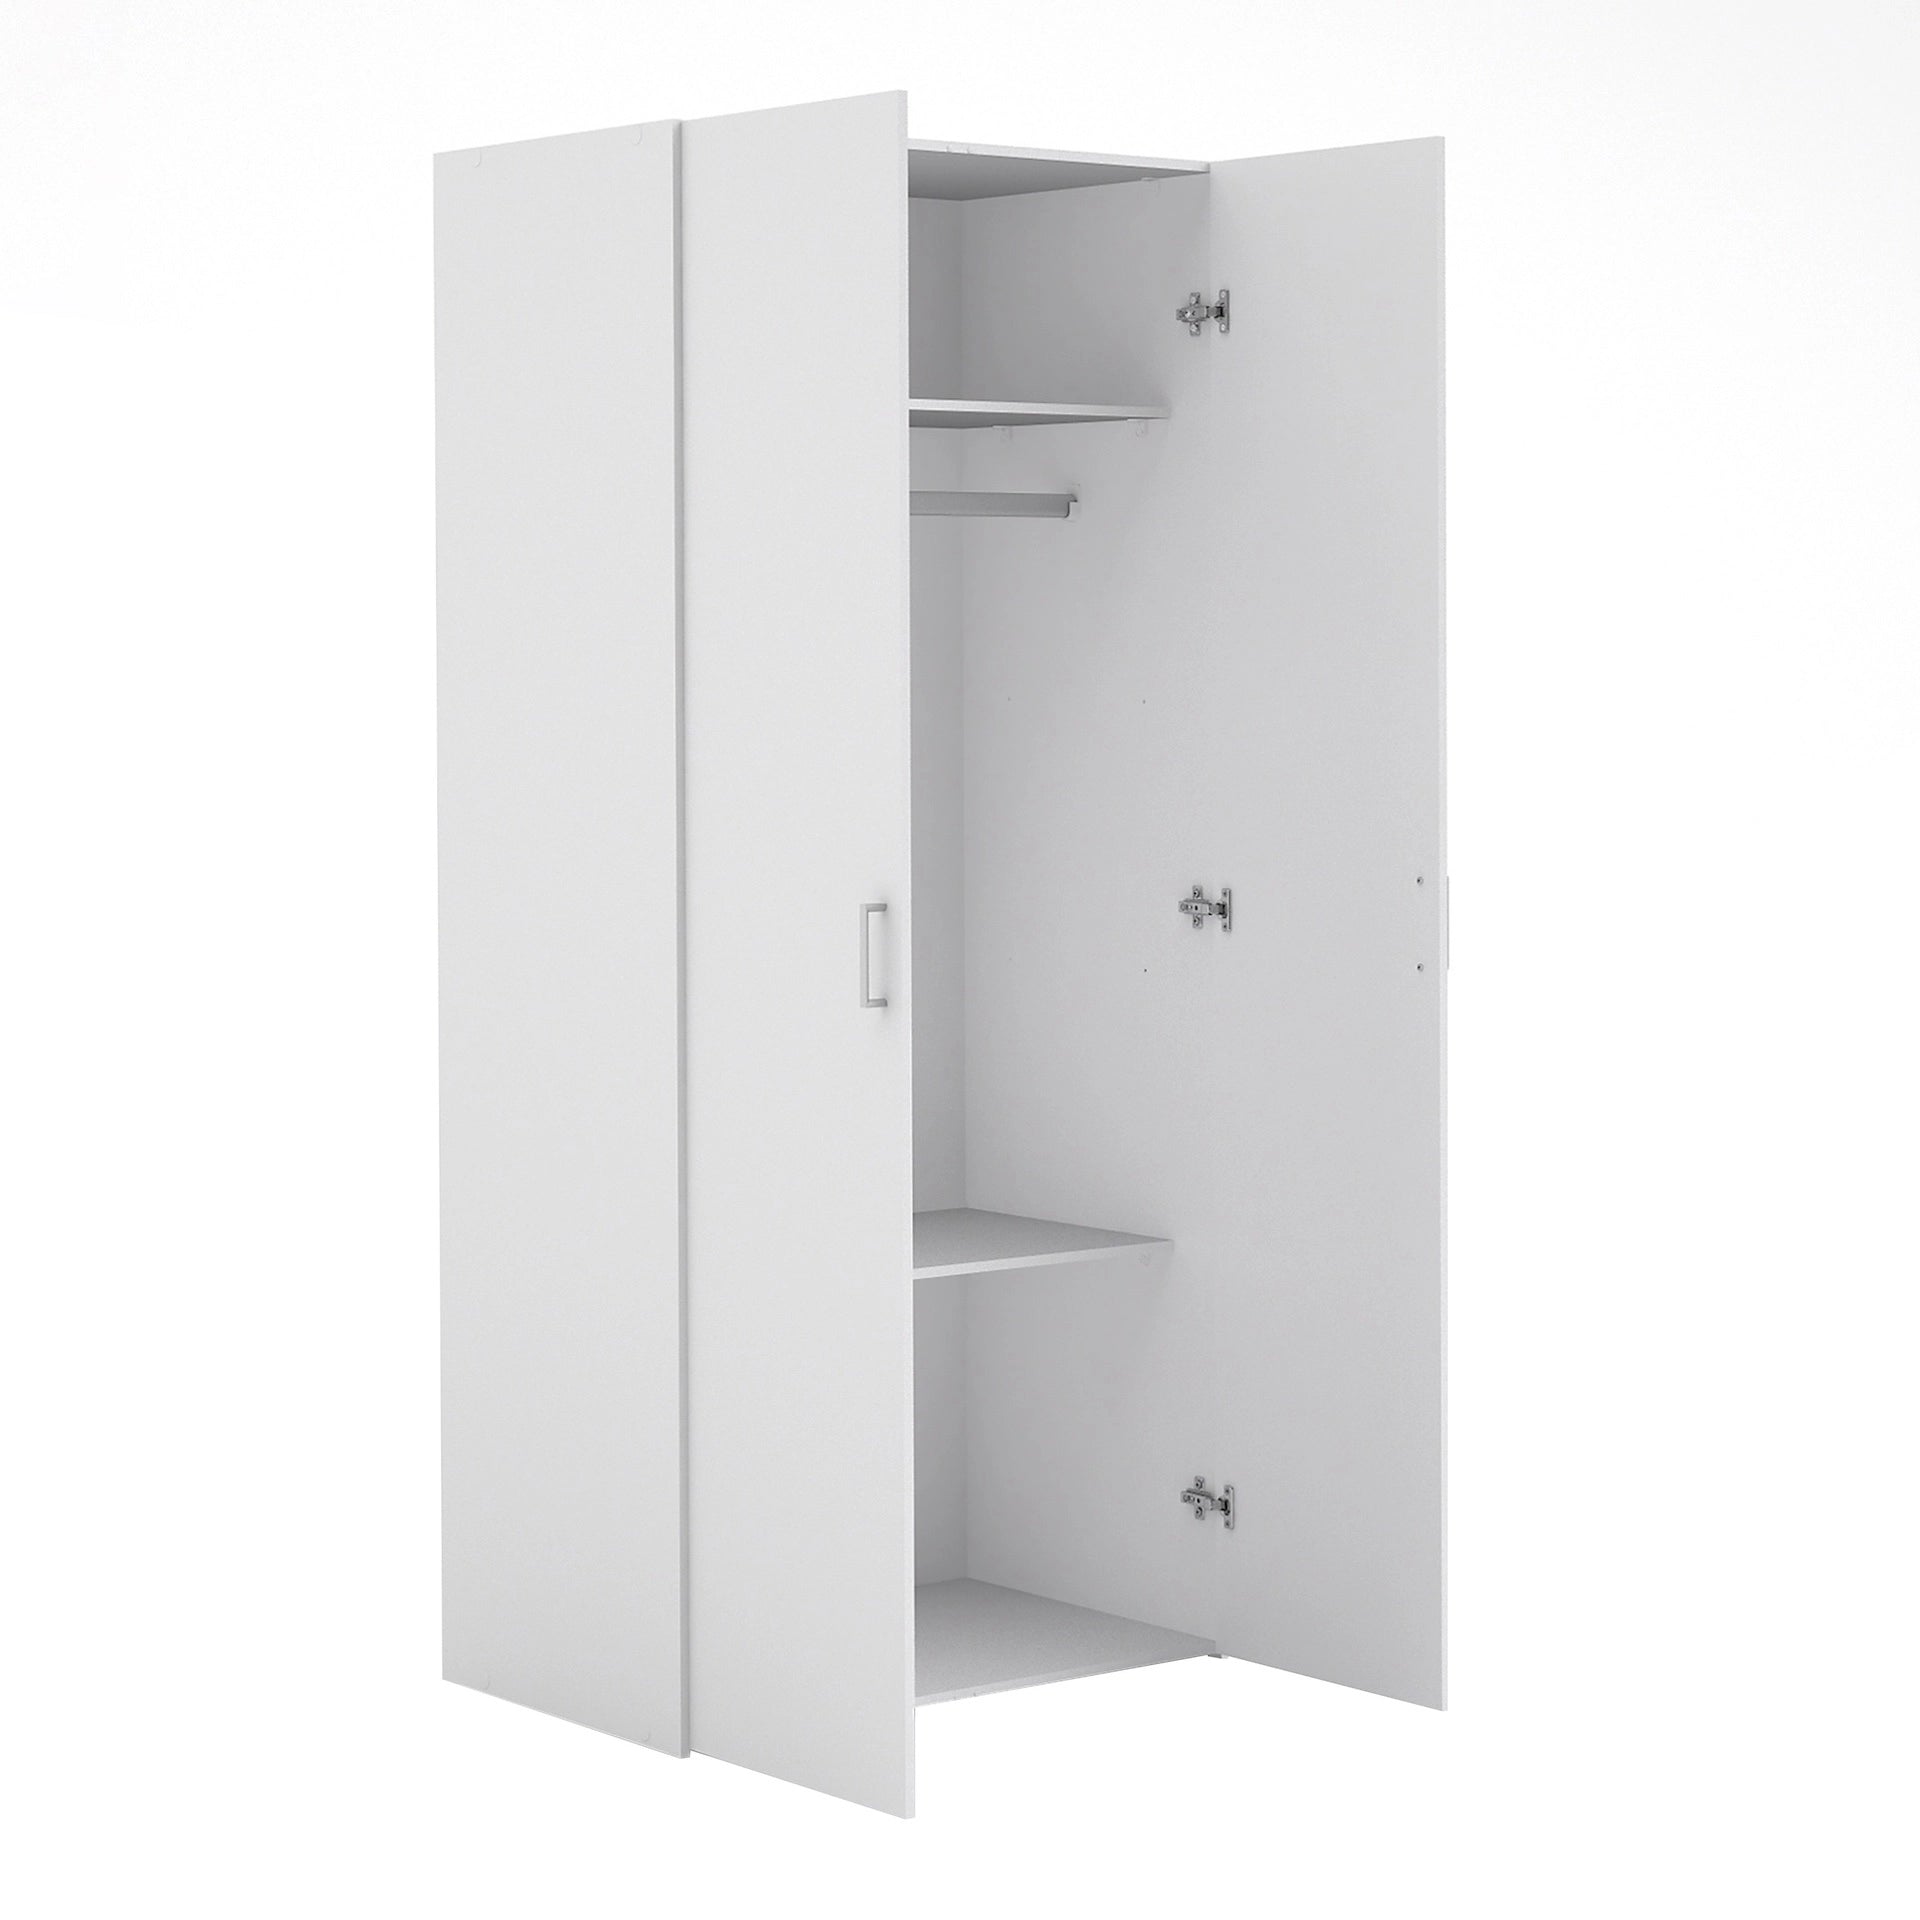 Furniture To Go Space Wardrobe with 2 Doors White 1750